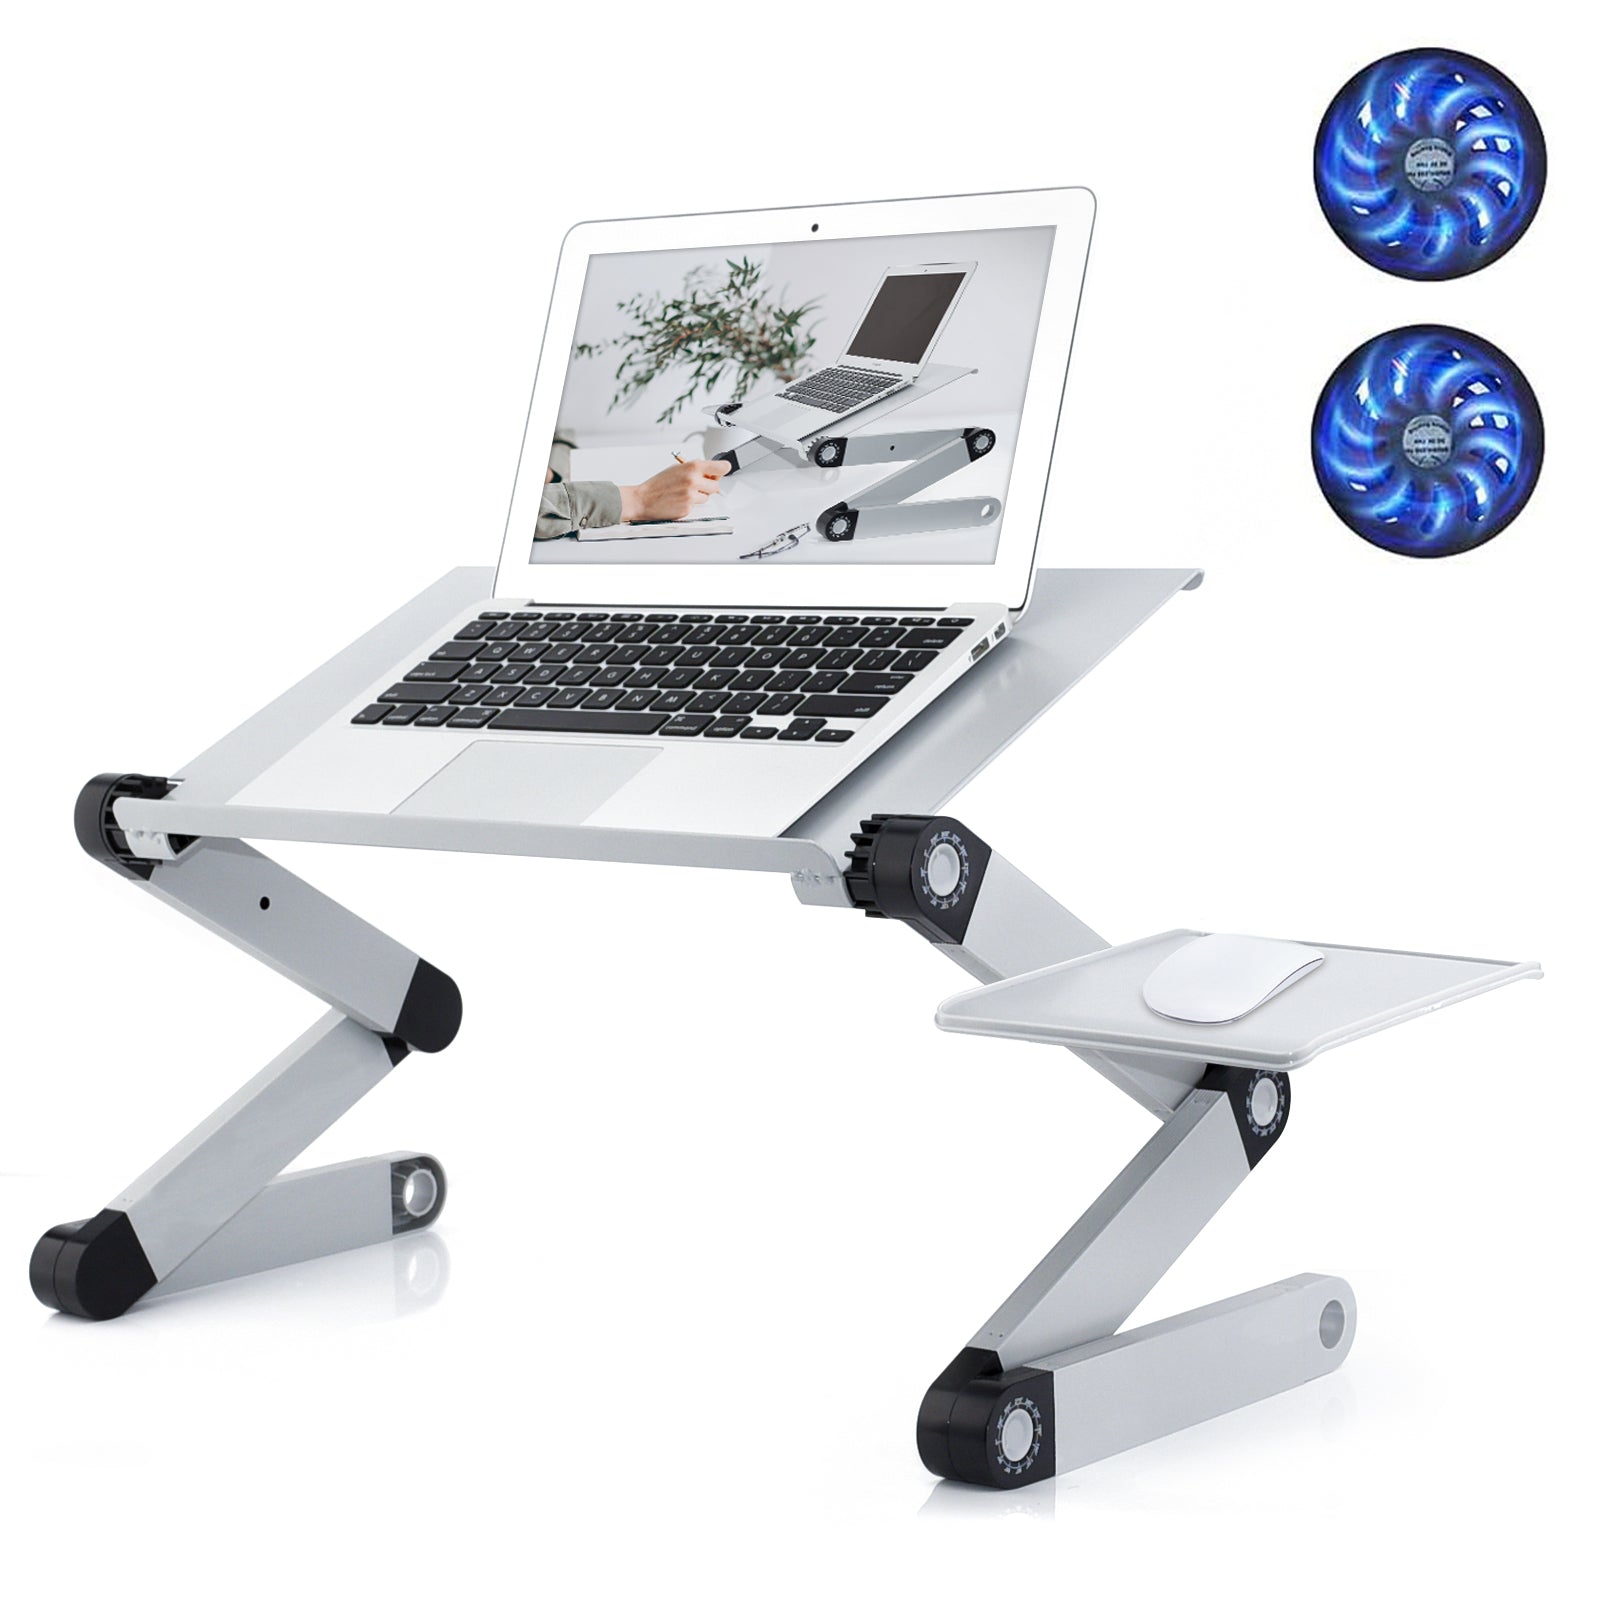 Adjustable Laptop Stand, RAINBEAN Laptop Desk with 2 CPU Cooling USB Fans for Bed Aluminum Lap Workstation Desk with Mouse Pad, Foldable Cook Book Stand Notebook Holder